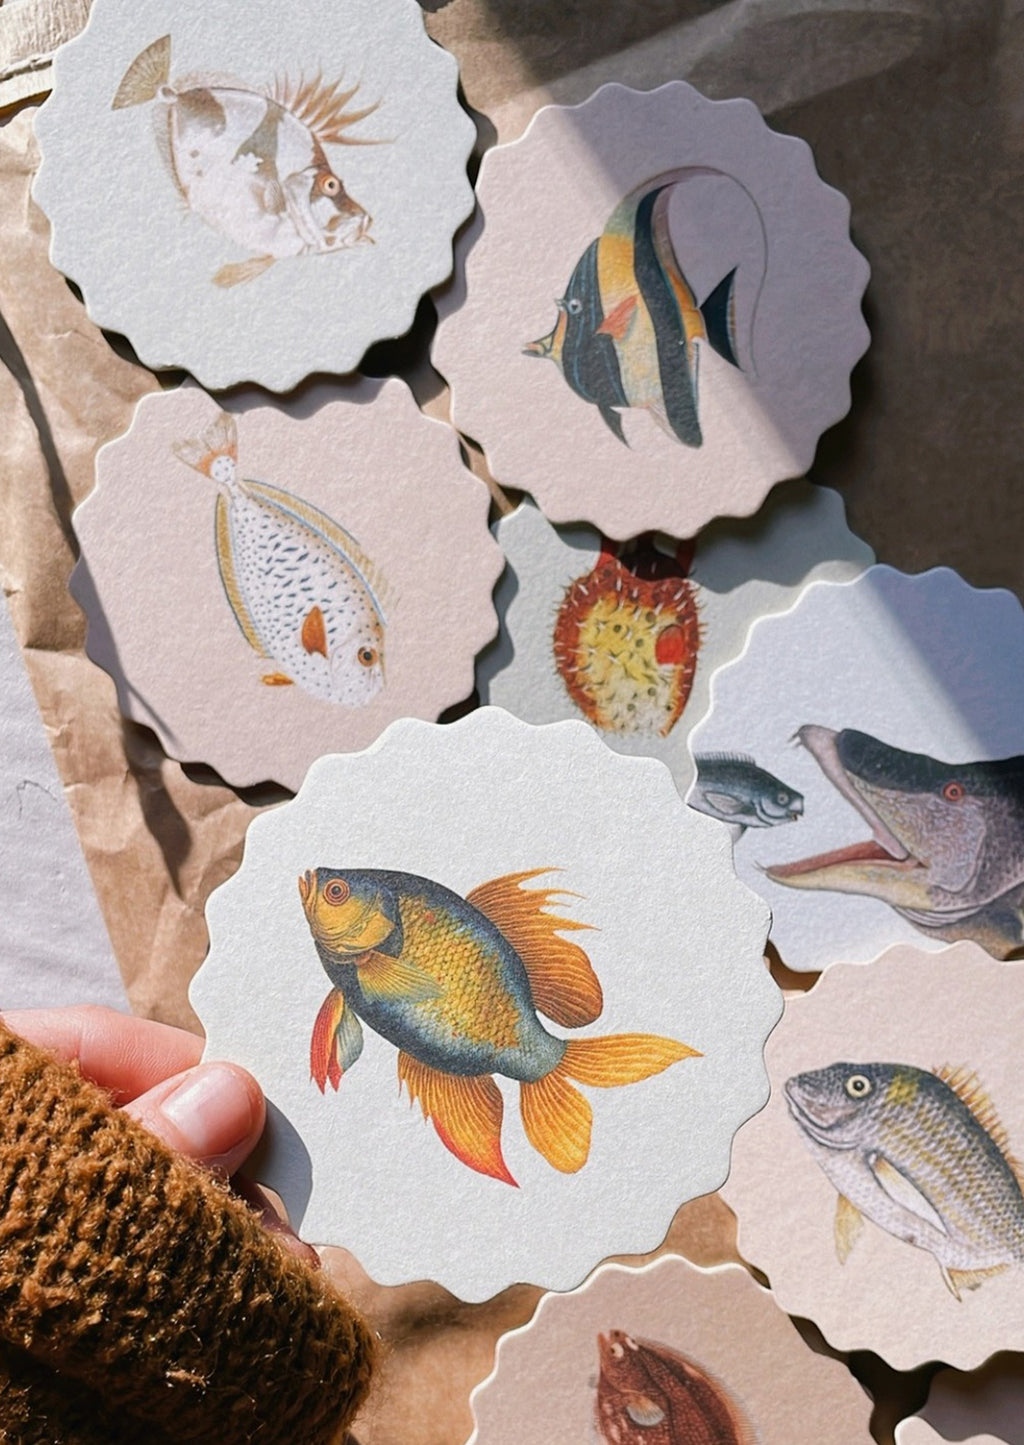 6: A set of scalloped edge paper coasters with 10 different fish prints.